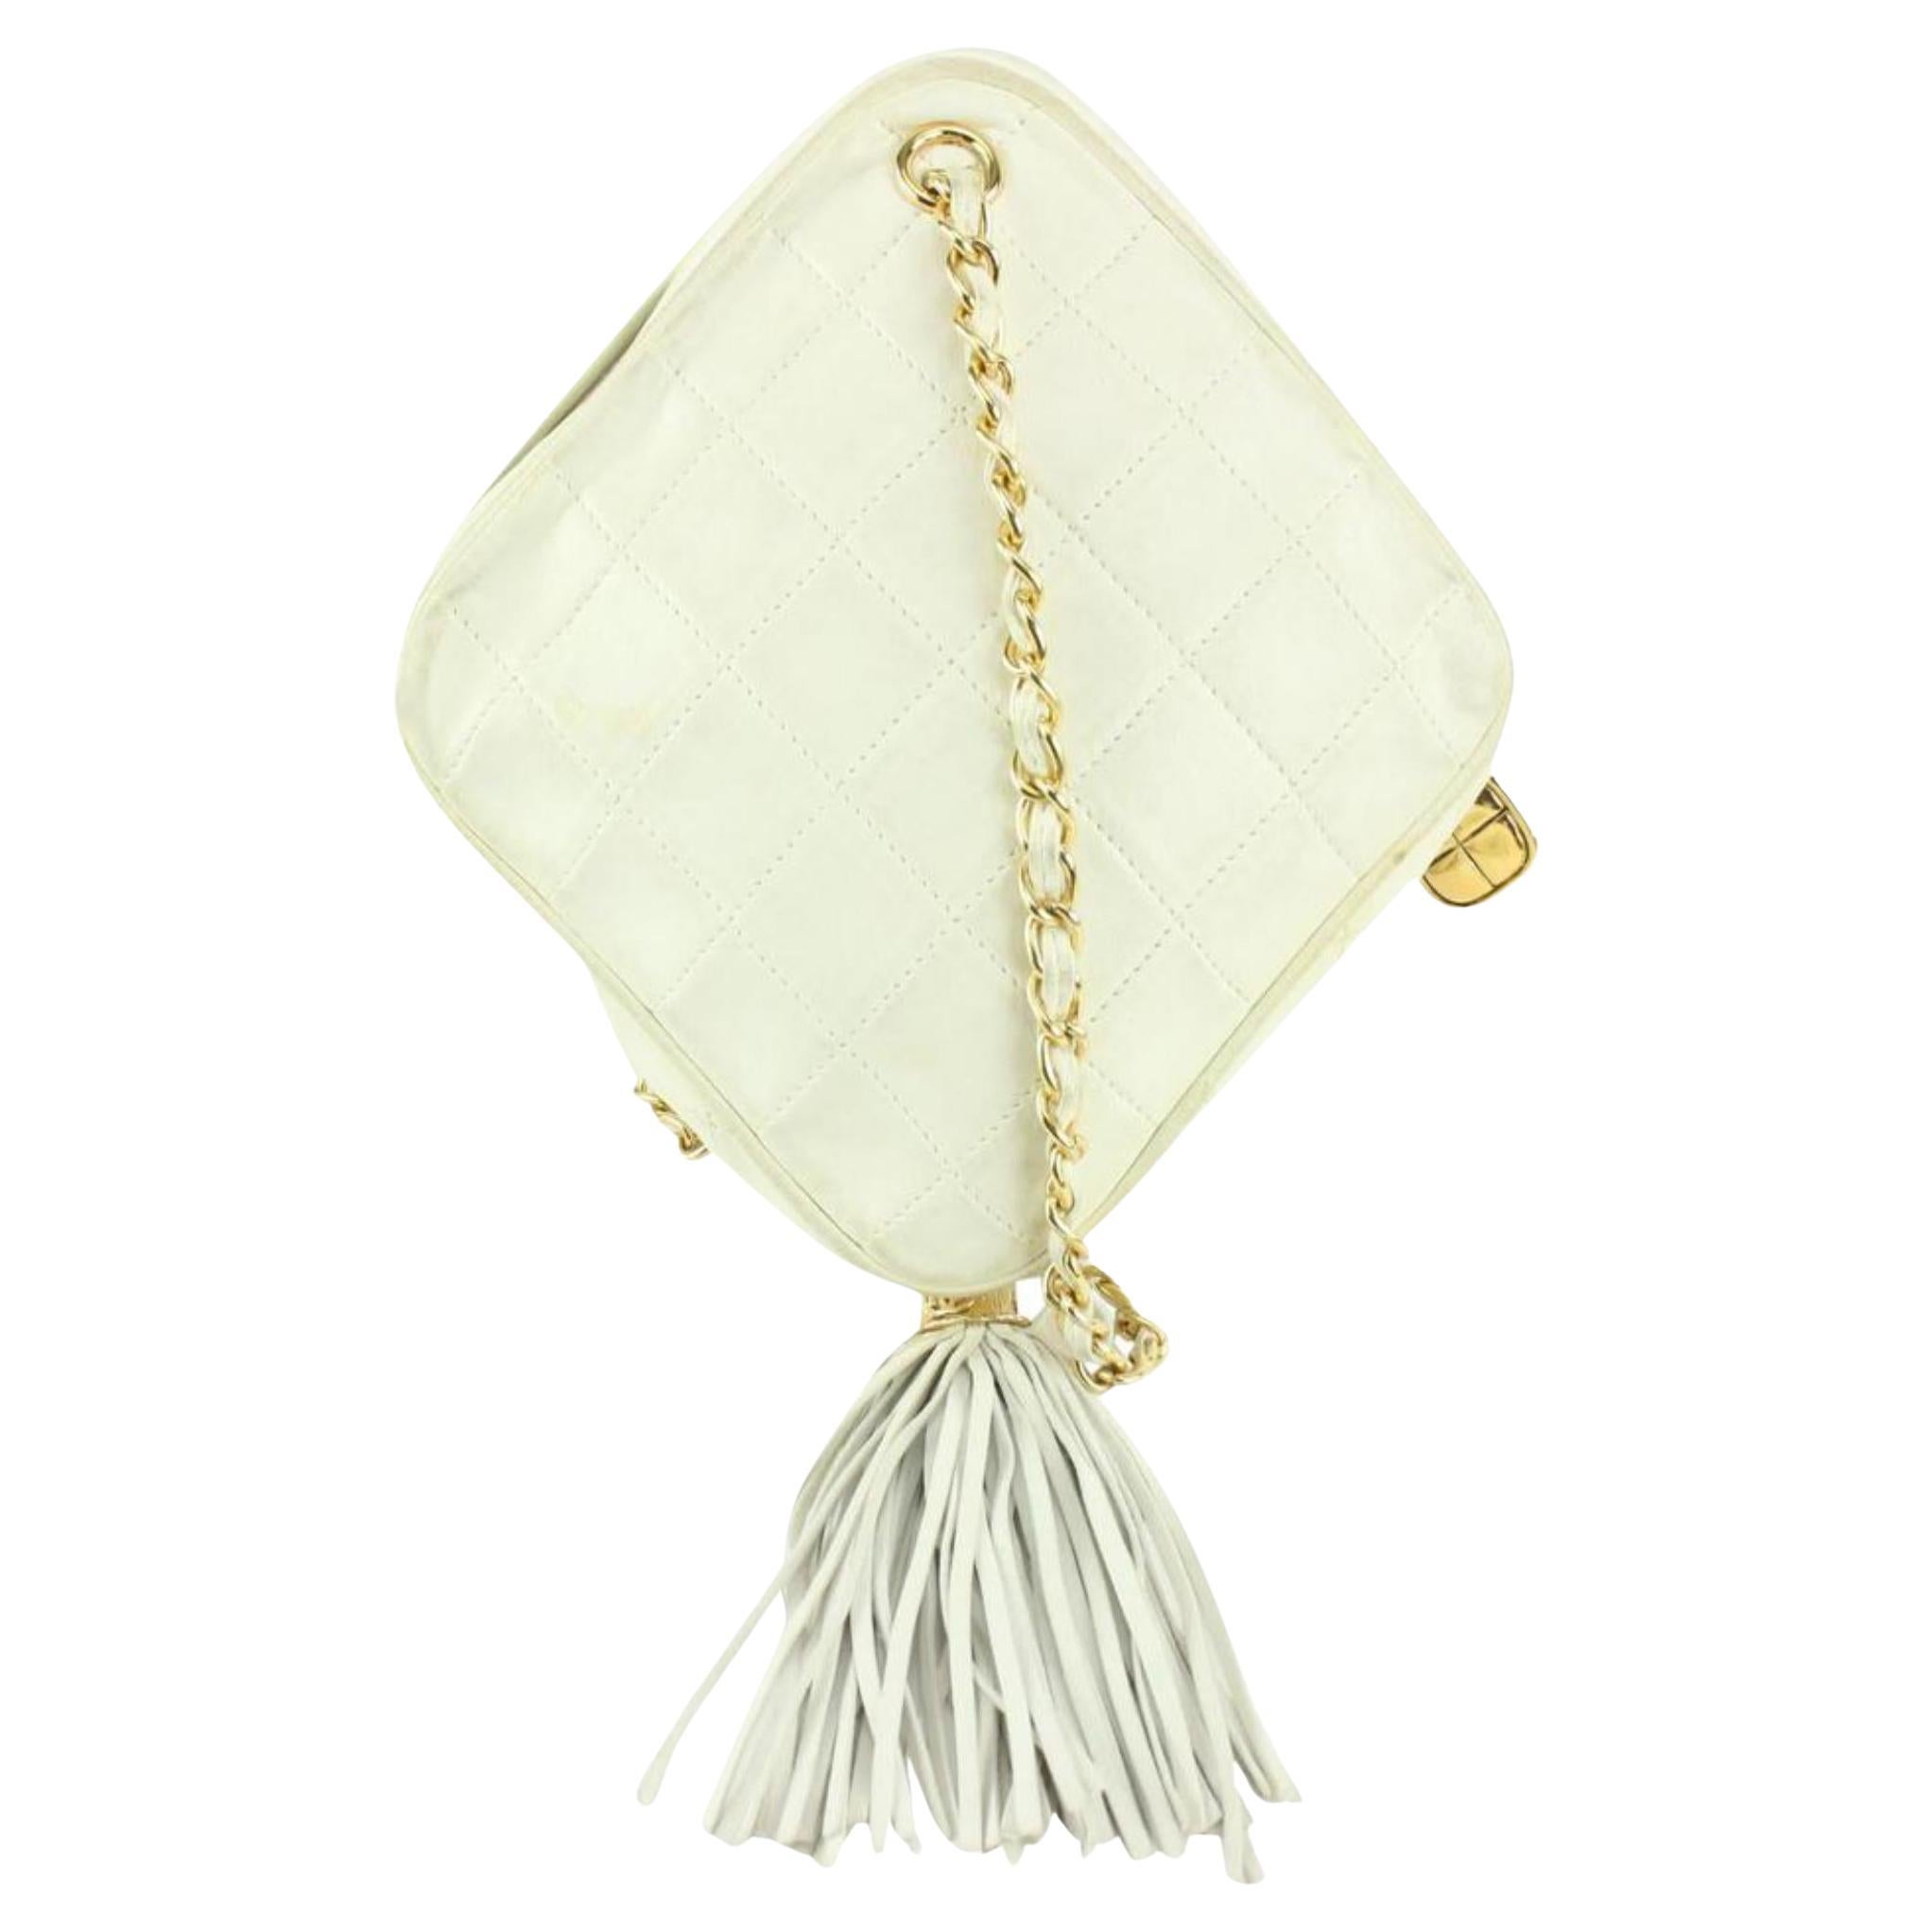 Chanel White Quilted Leather Diamond Clutch on Chain Tassel Bag 1123c30